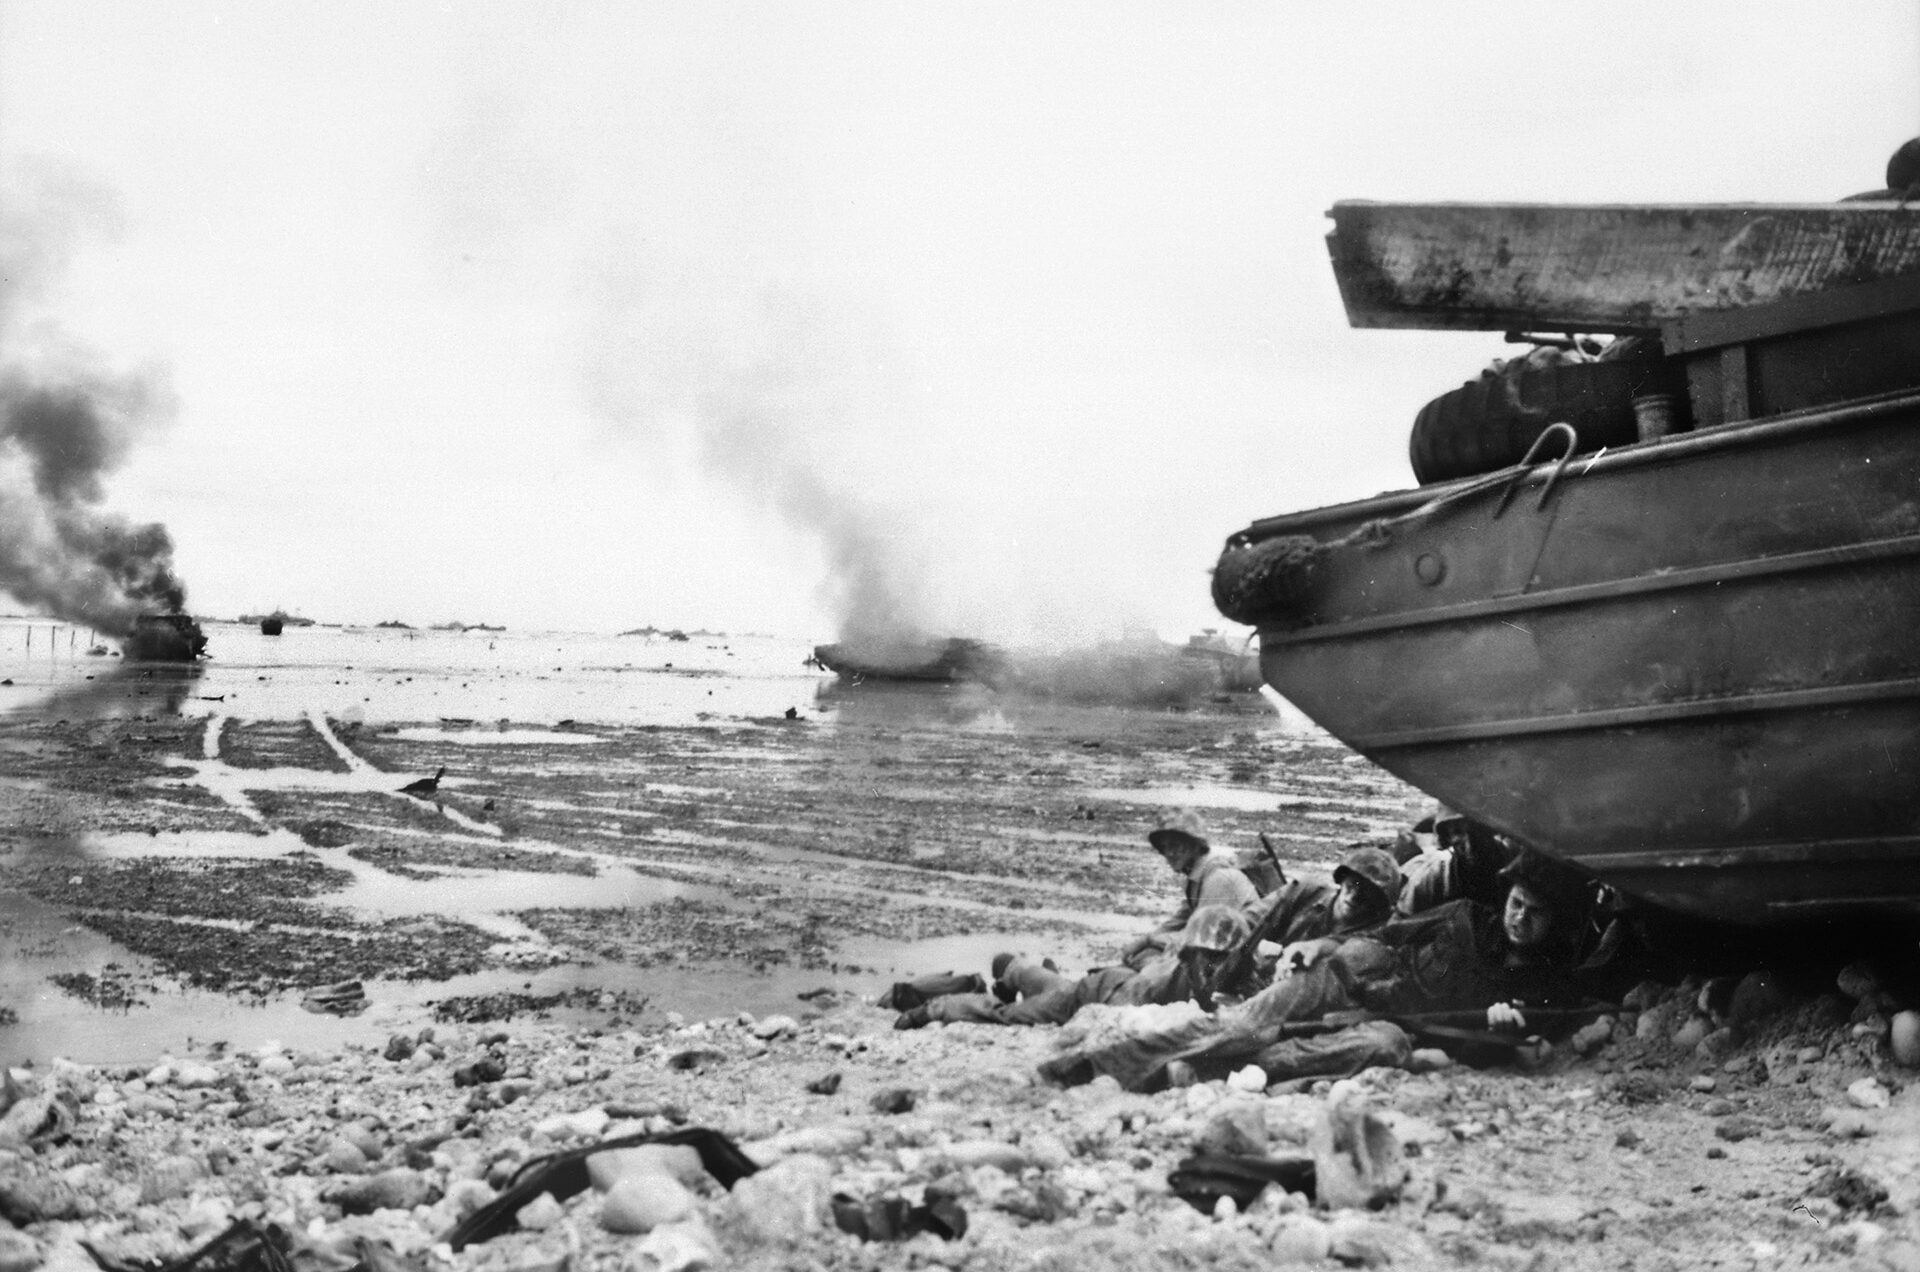 American Marines take cover from intense Japanese fire on the beach at Peleliu. These men are crouching behind an amphibious DUKW vehicle, while a landing craft burns furiously in the background after receiving a direct hit from a hidden Japanese gun on shore. 